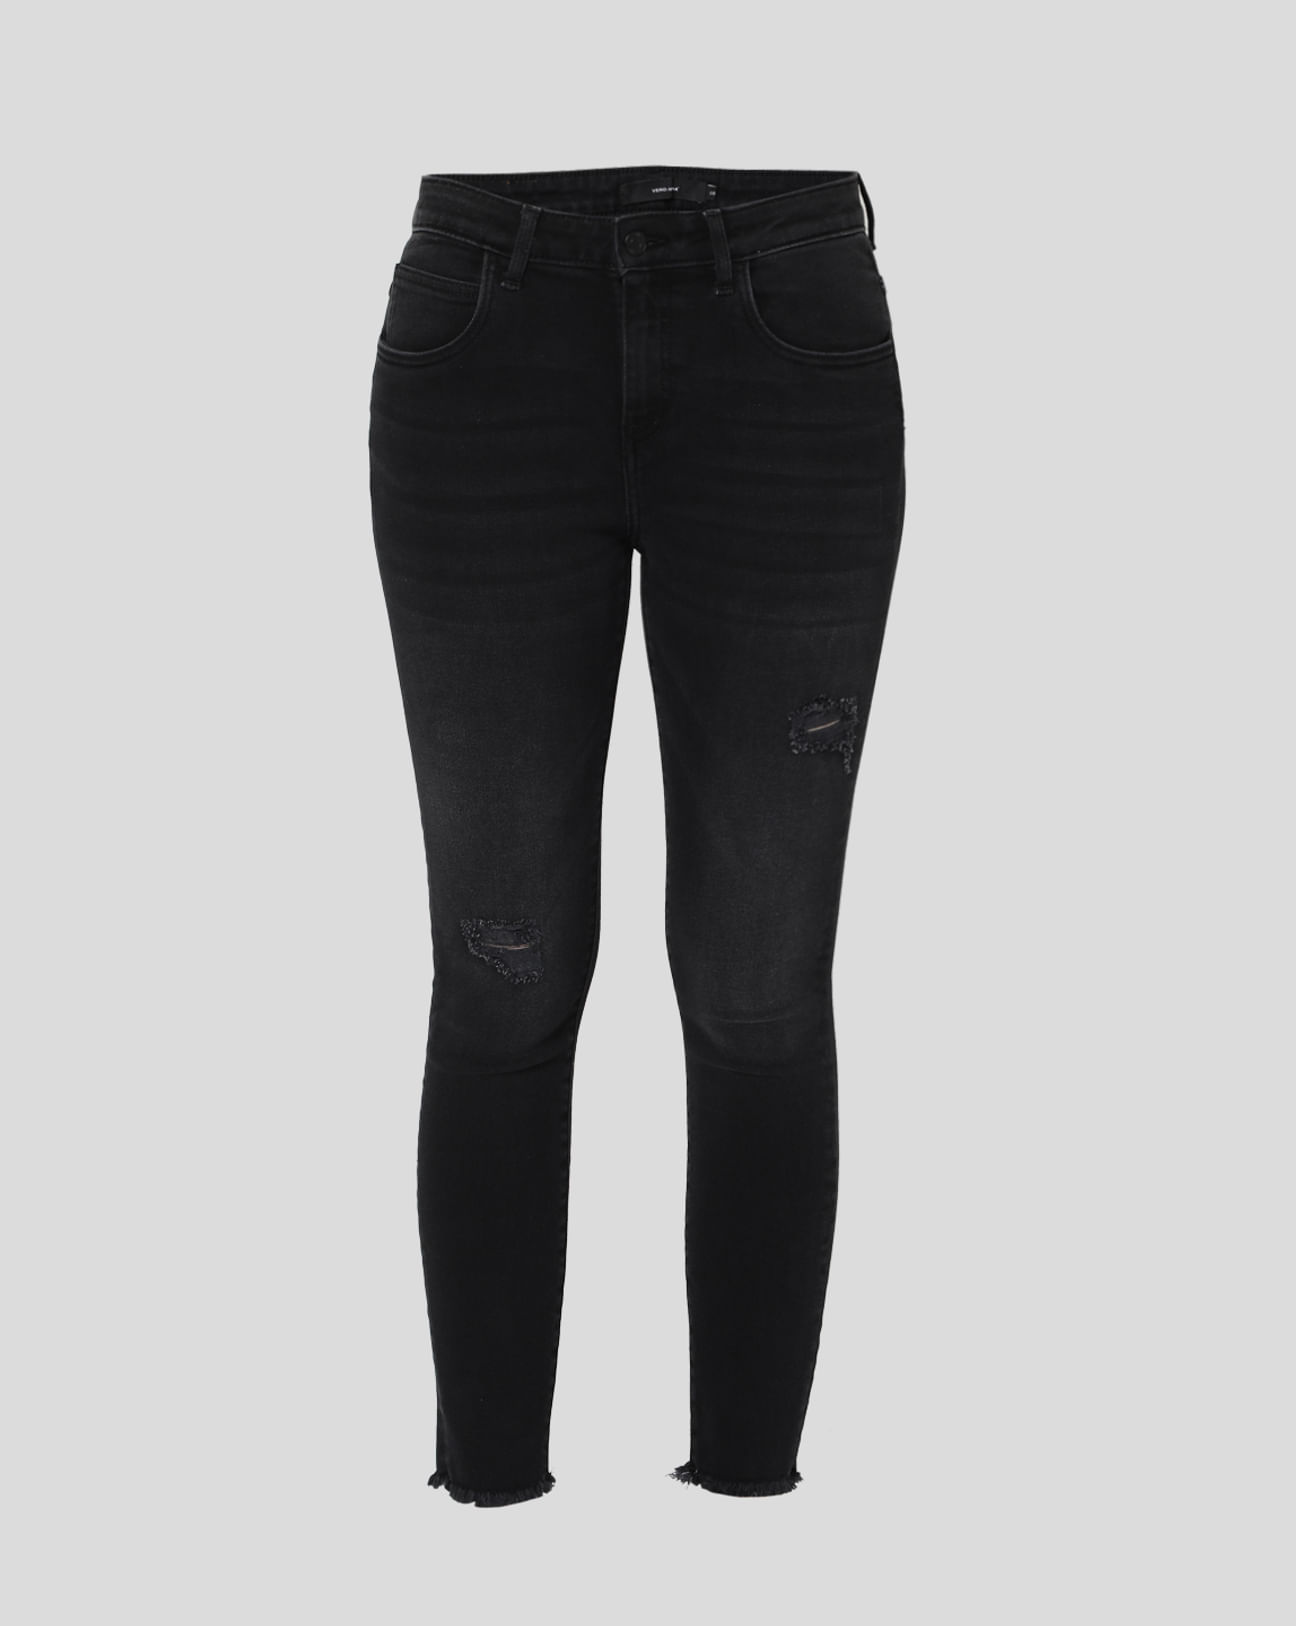 Dem hovedpine Overgang Black High Rise Ripped Skinny Jeans